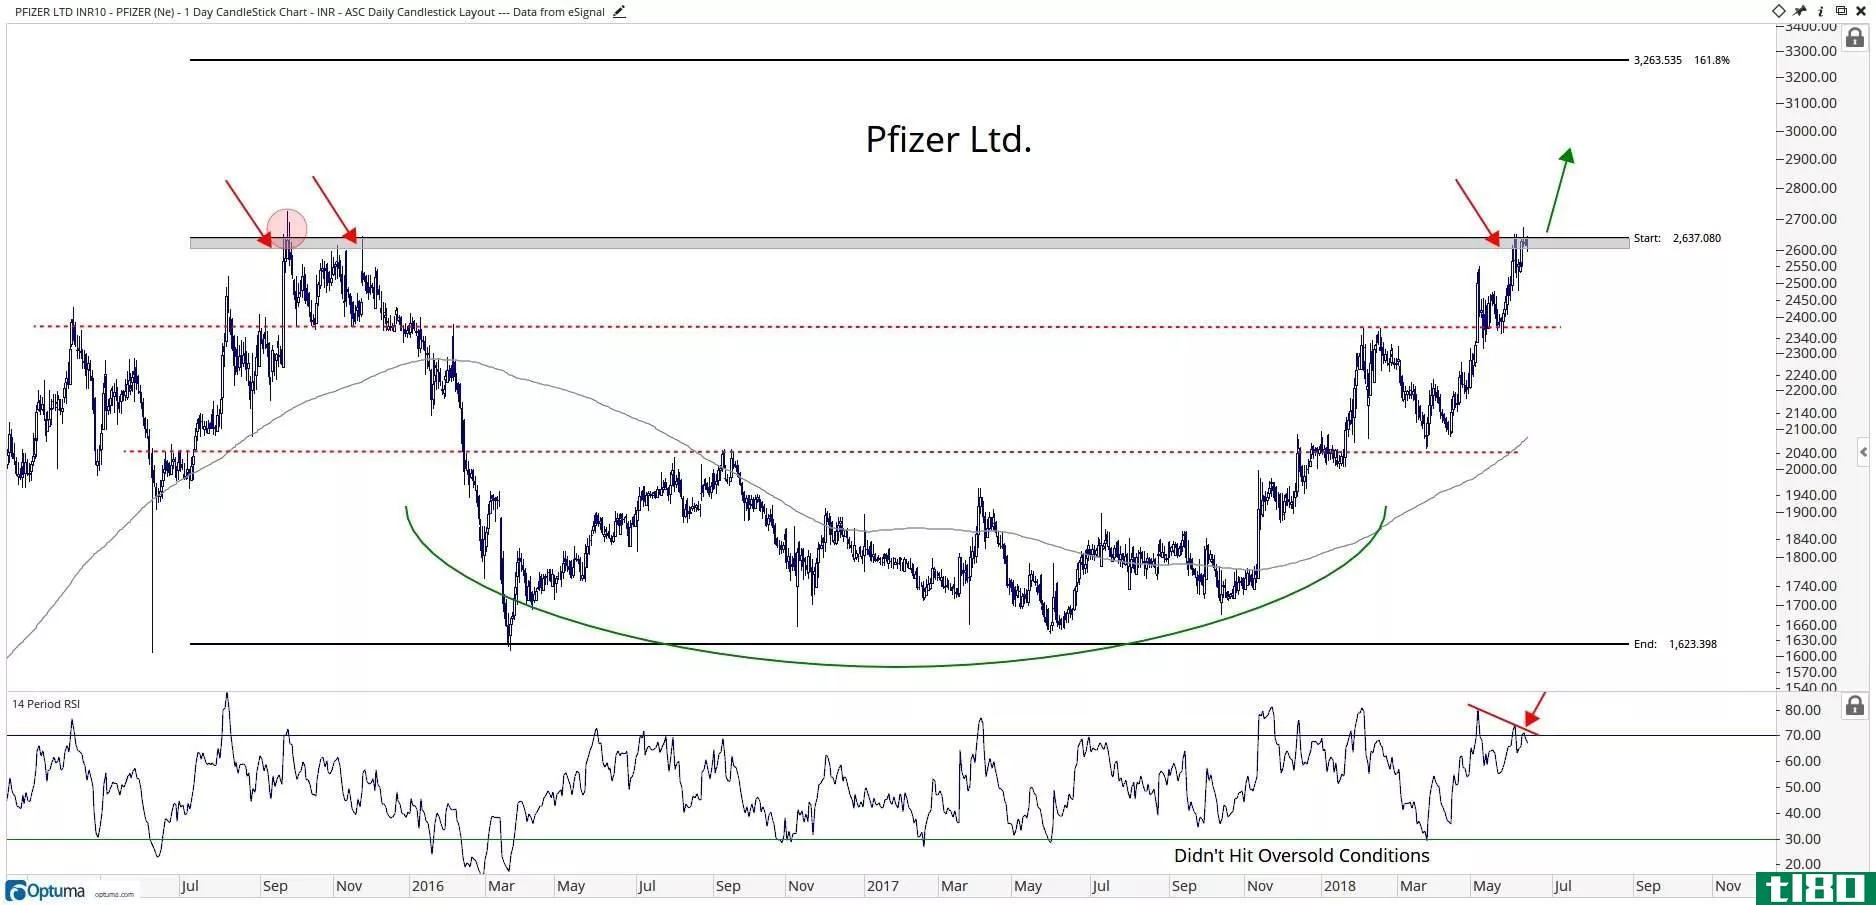 Technical chart showing the performance of Pfizer Limited (PFIZER.BO) stock